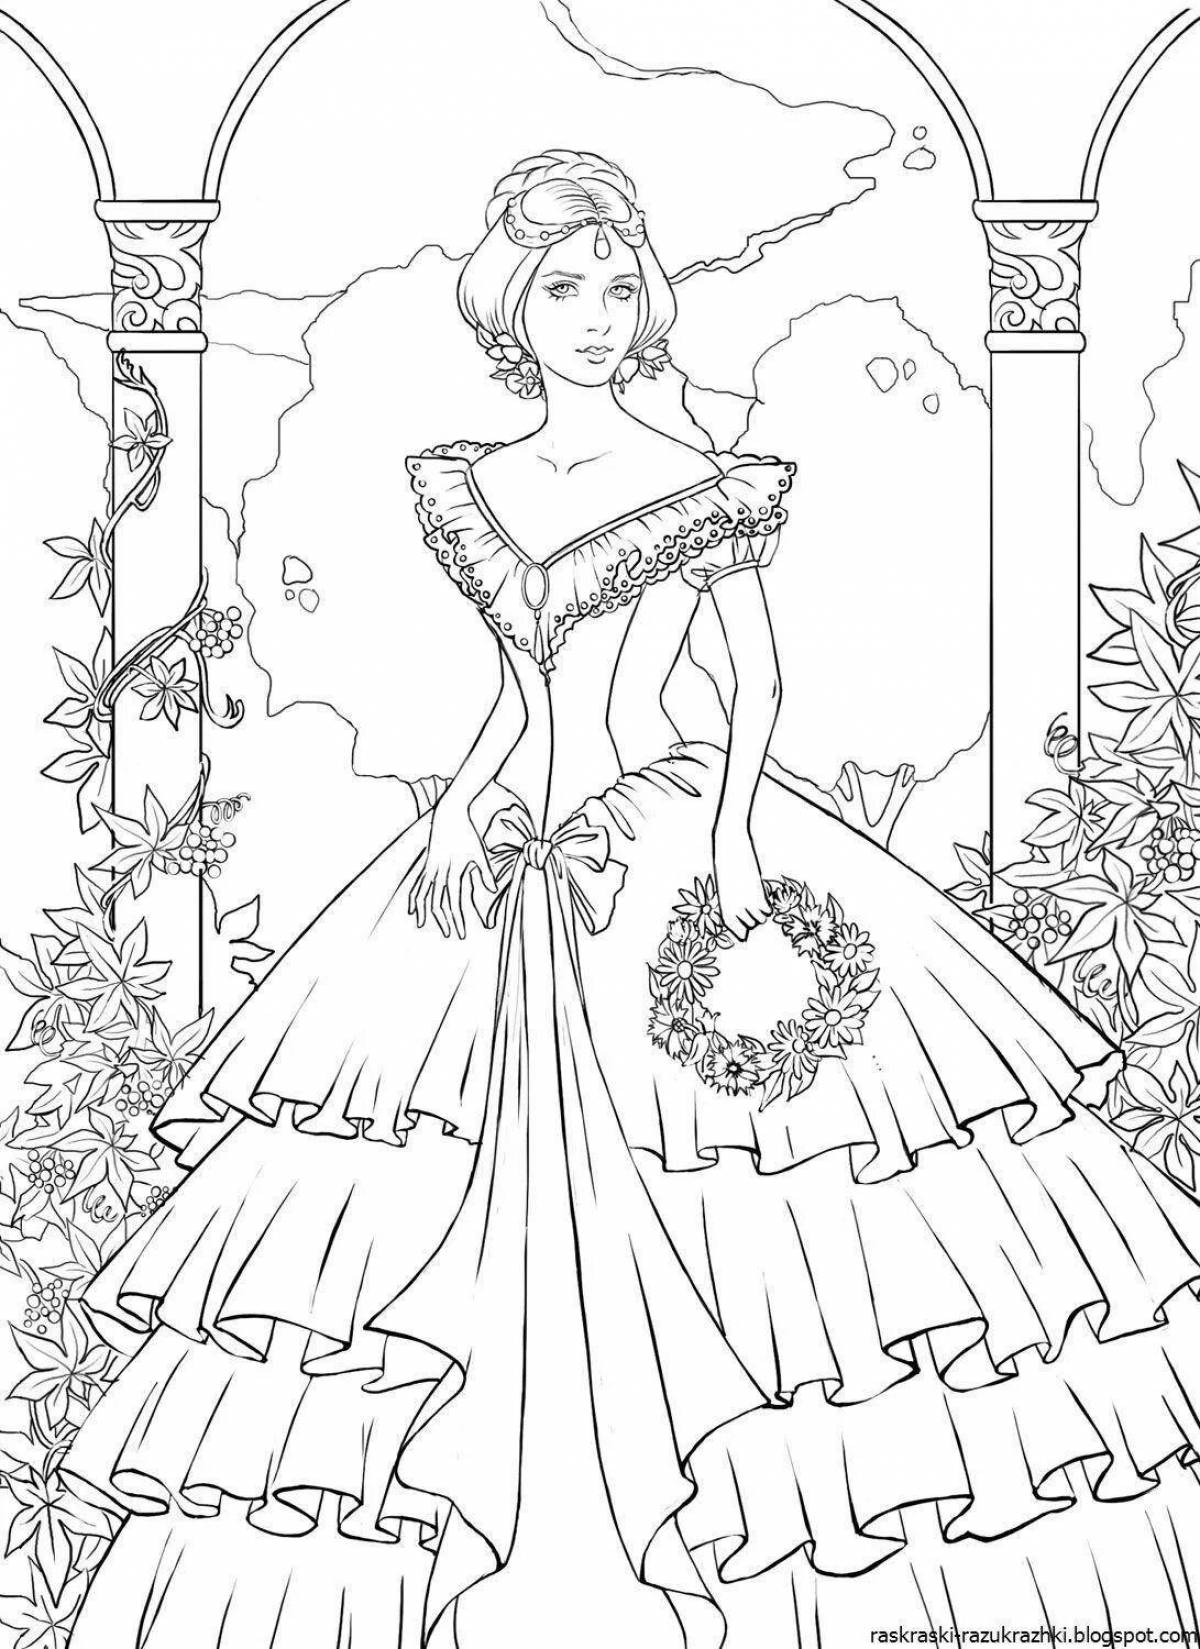 Fairy coloring pages for girls - the best in the world